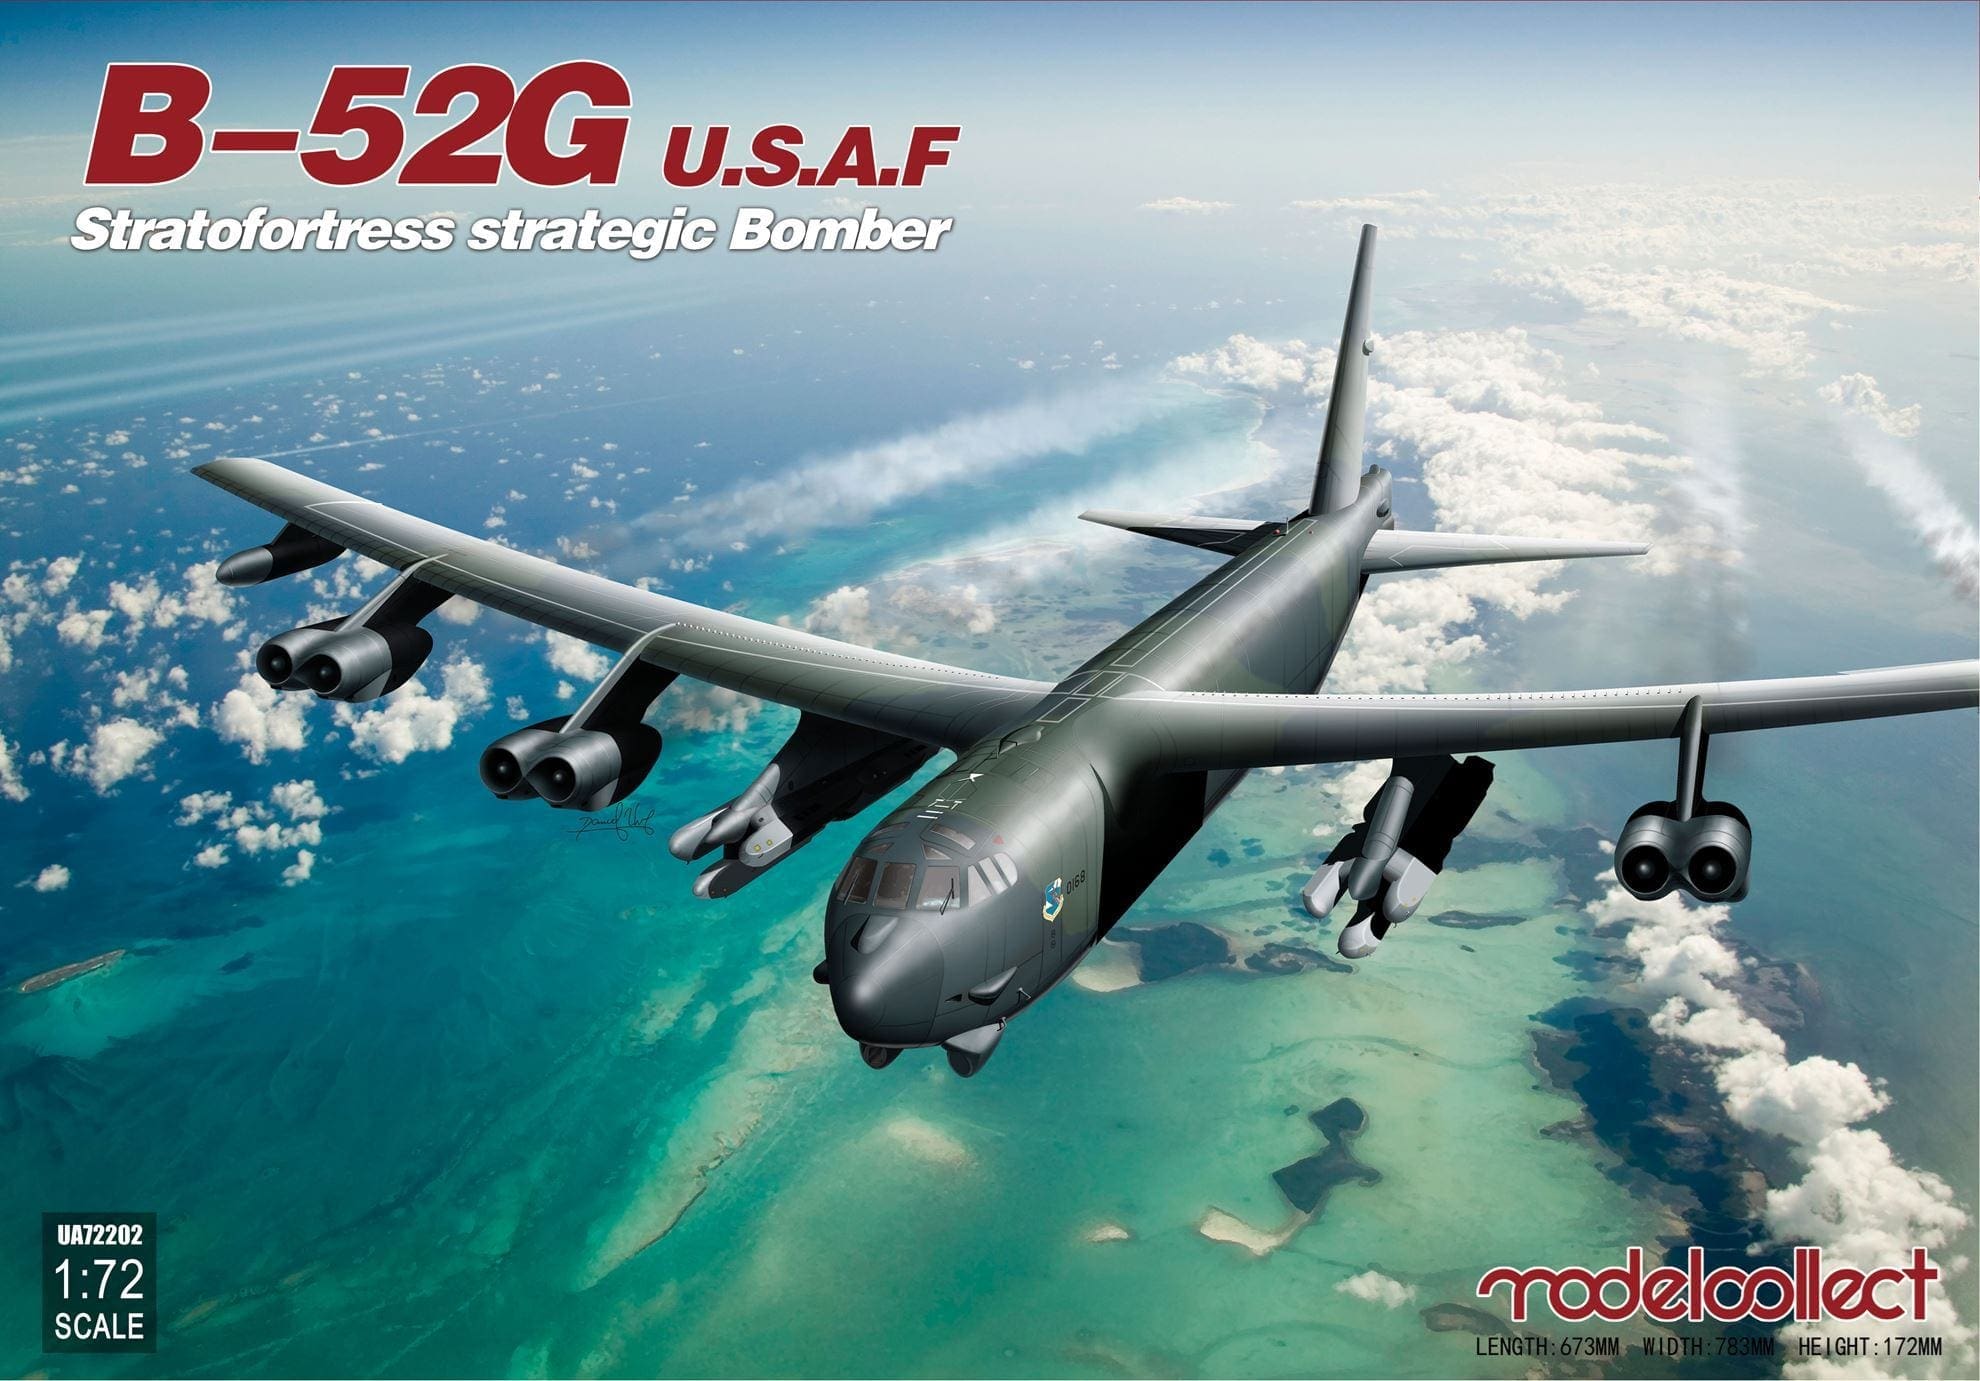 Modelcollect 72202 1/72 B-52G Stratofortress USAF 